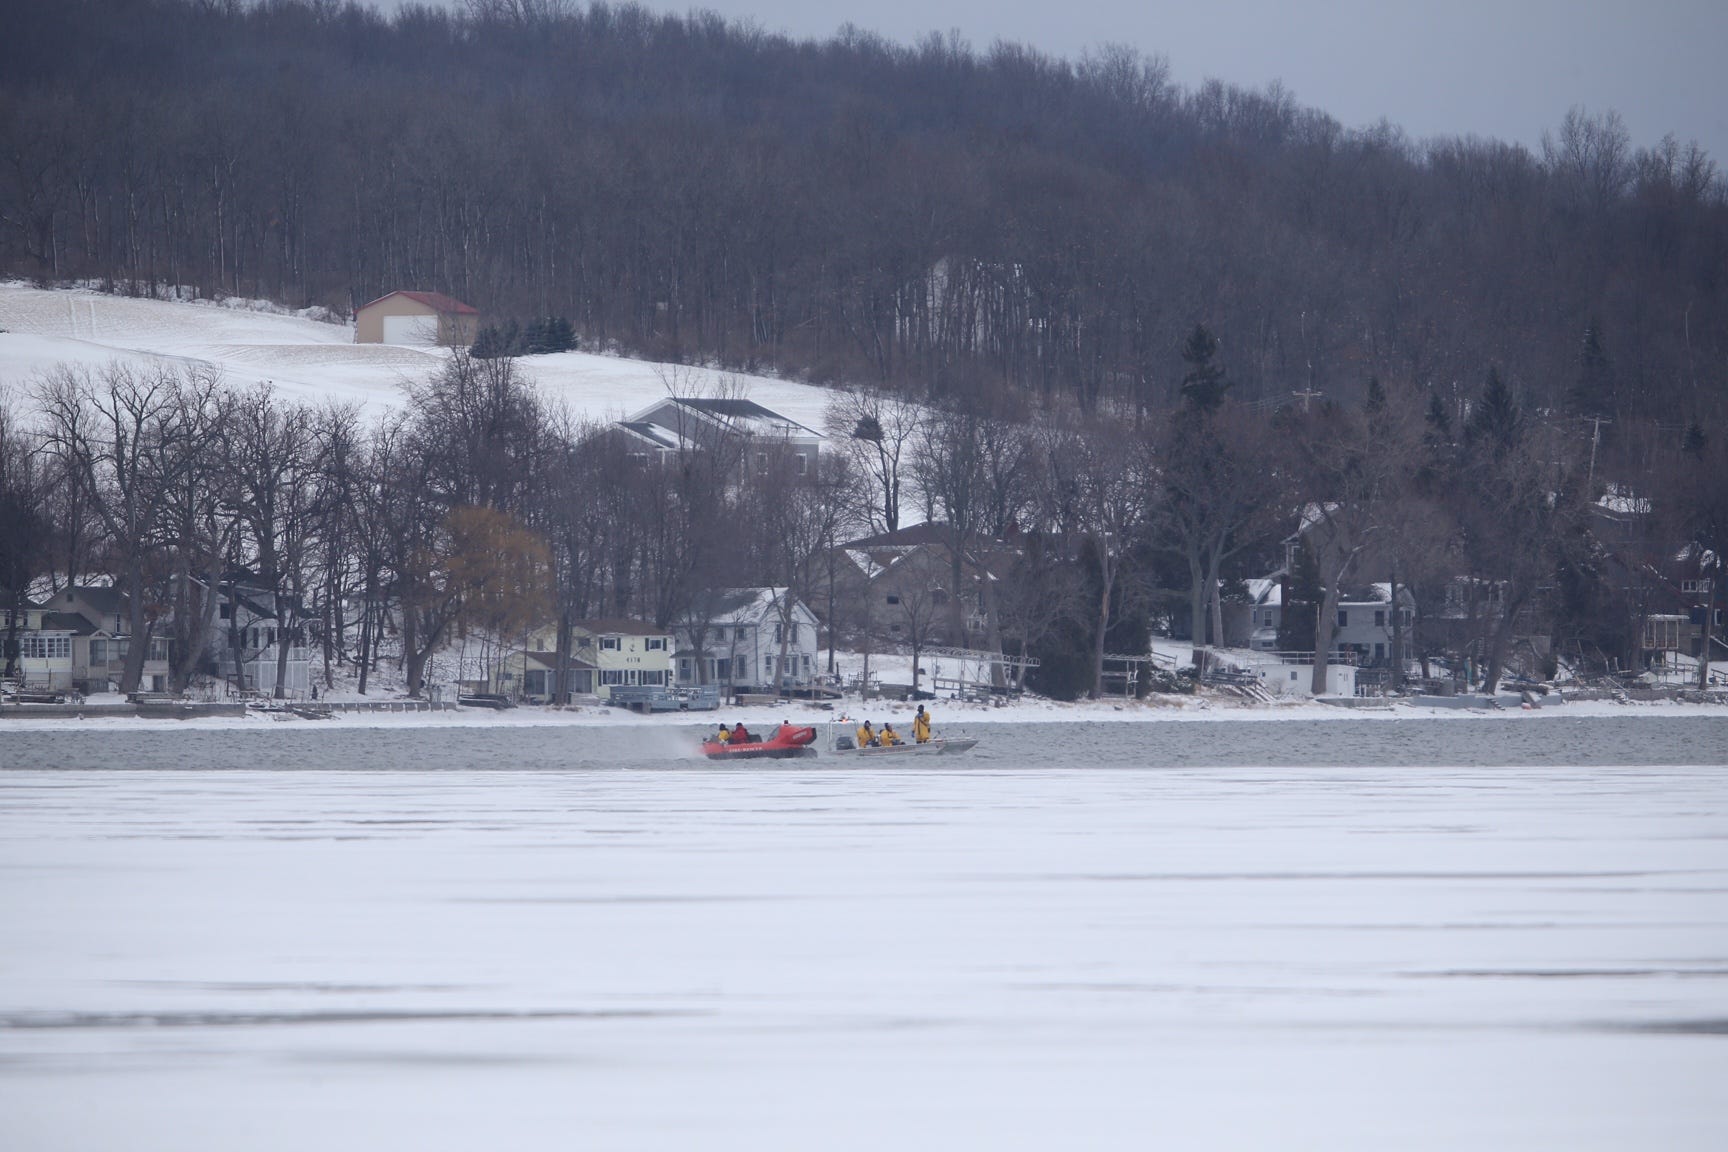 2 missing snowmobilers recovered from Conesus Lake